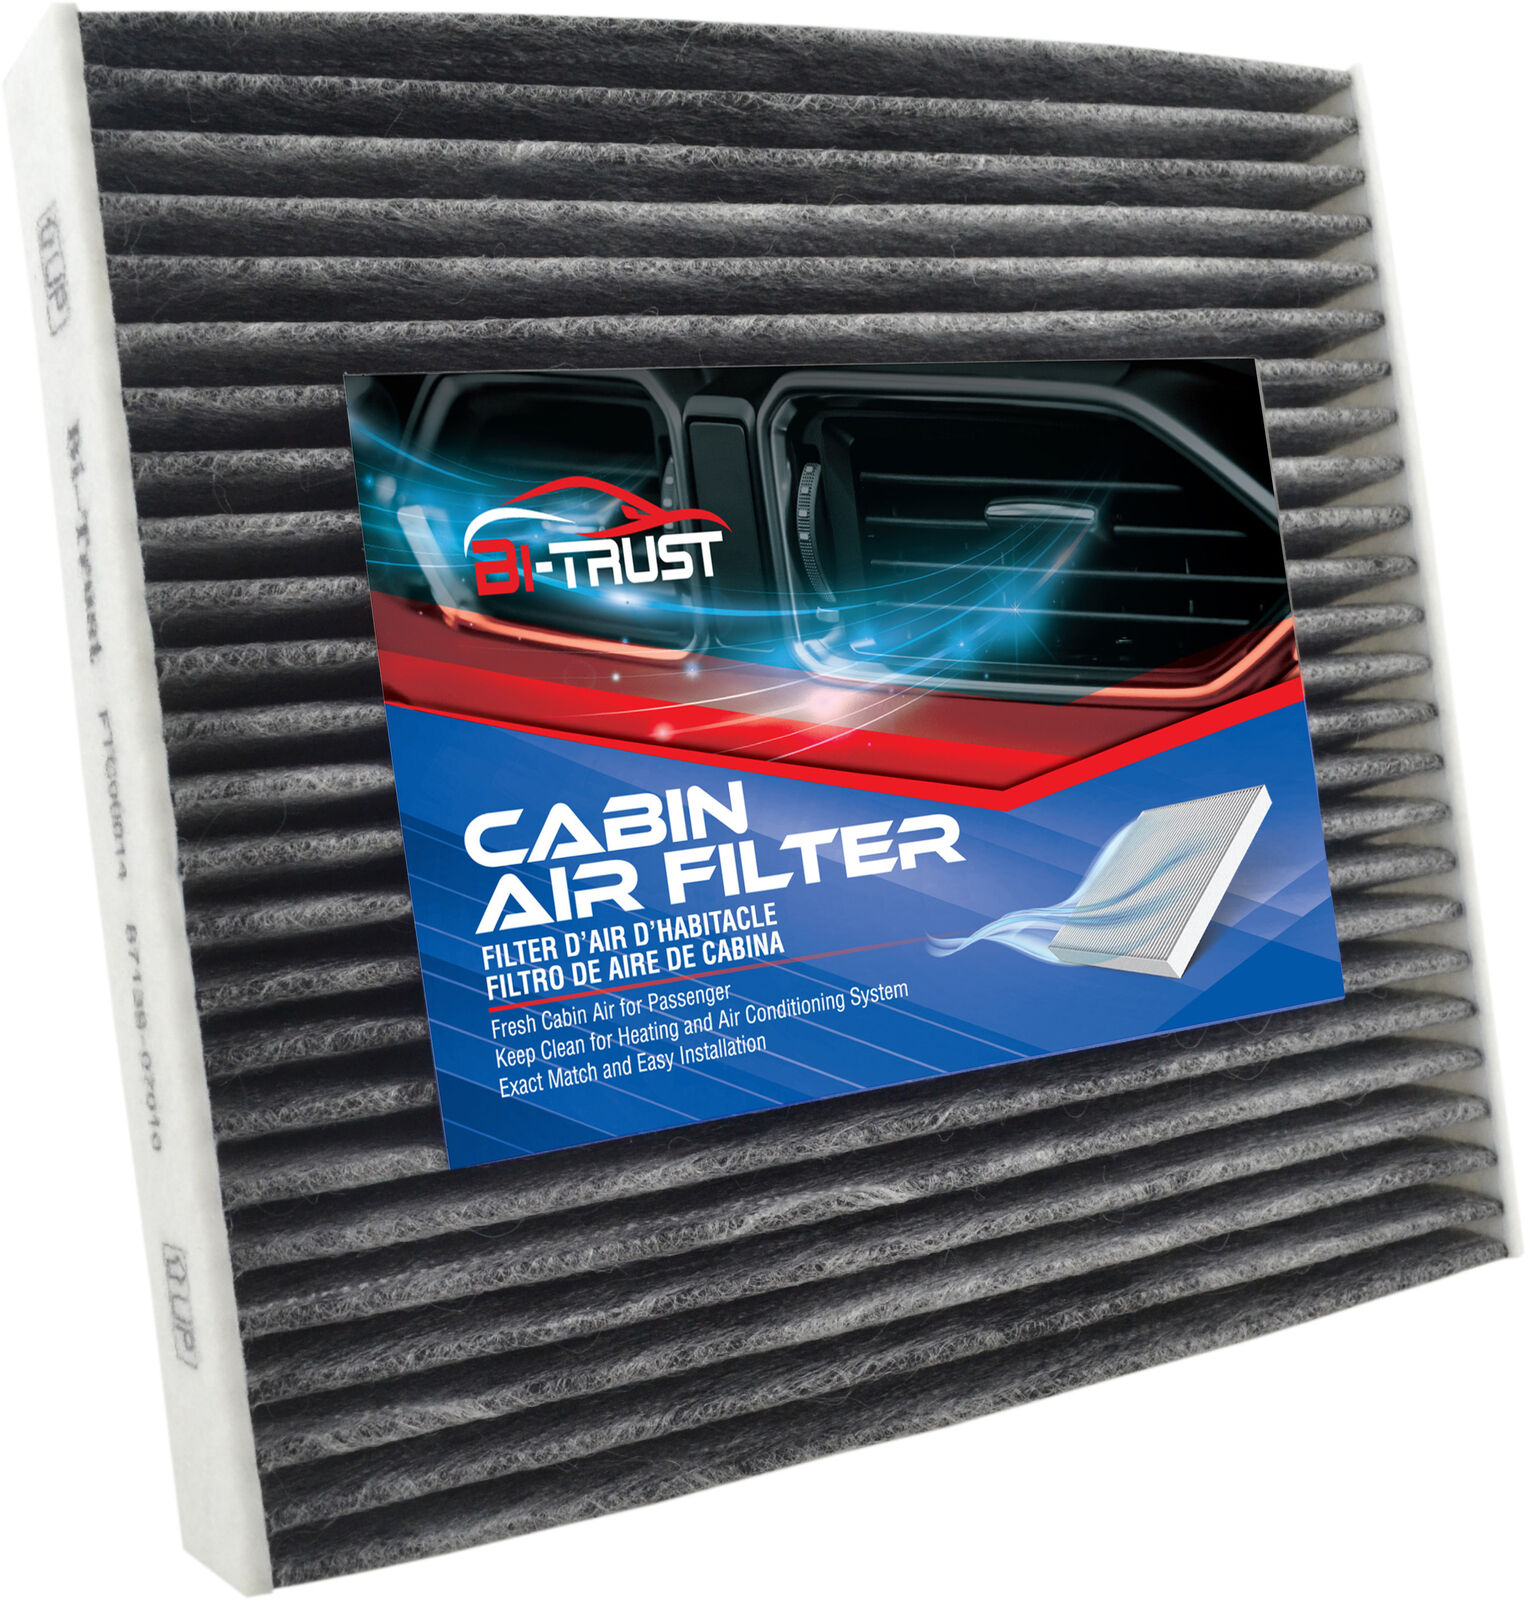 Cabin Air Filter for Toyota Tundra 2007-2022 Venza 09-16 Yaris 06-18